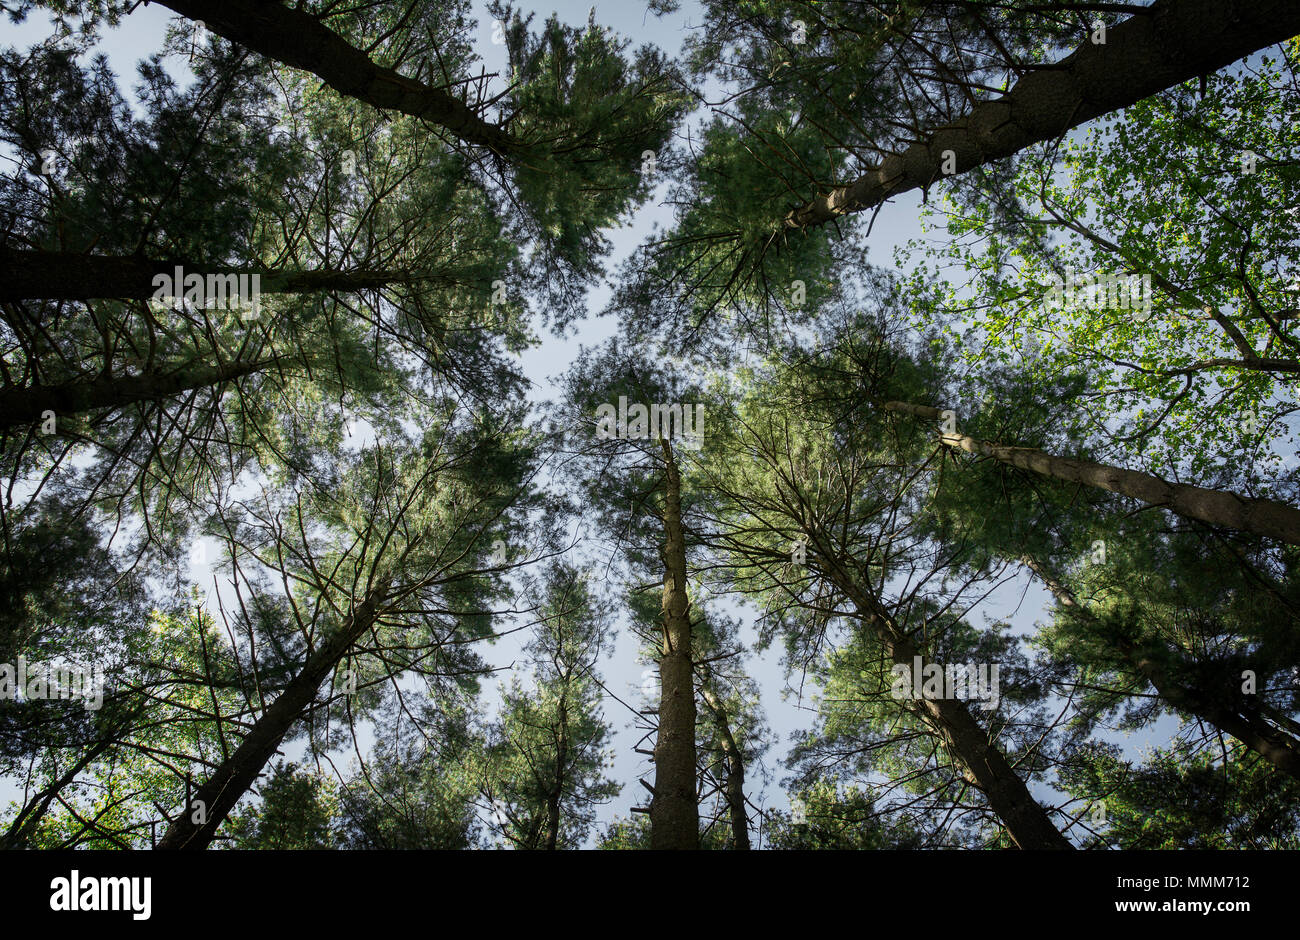 Looking up at the blue sky through a stand of tall pine trees. Nice concept image for growth or achievment. Stock Photo